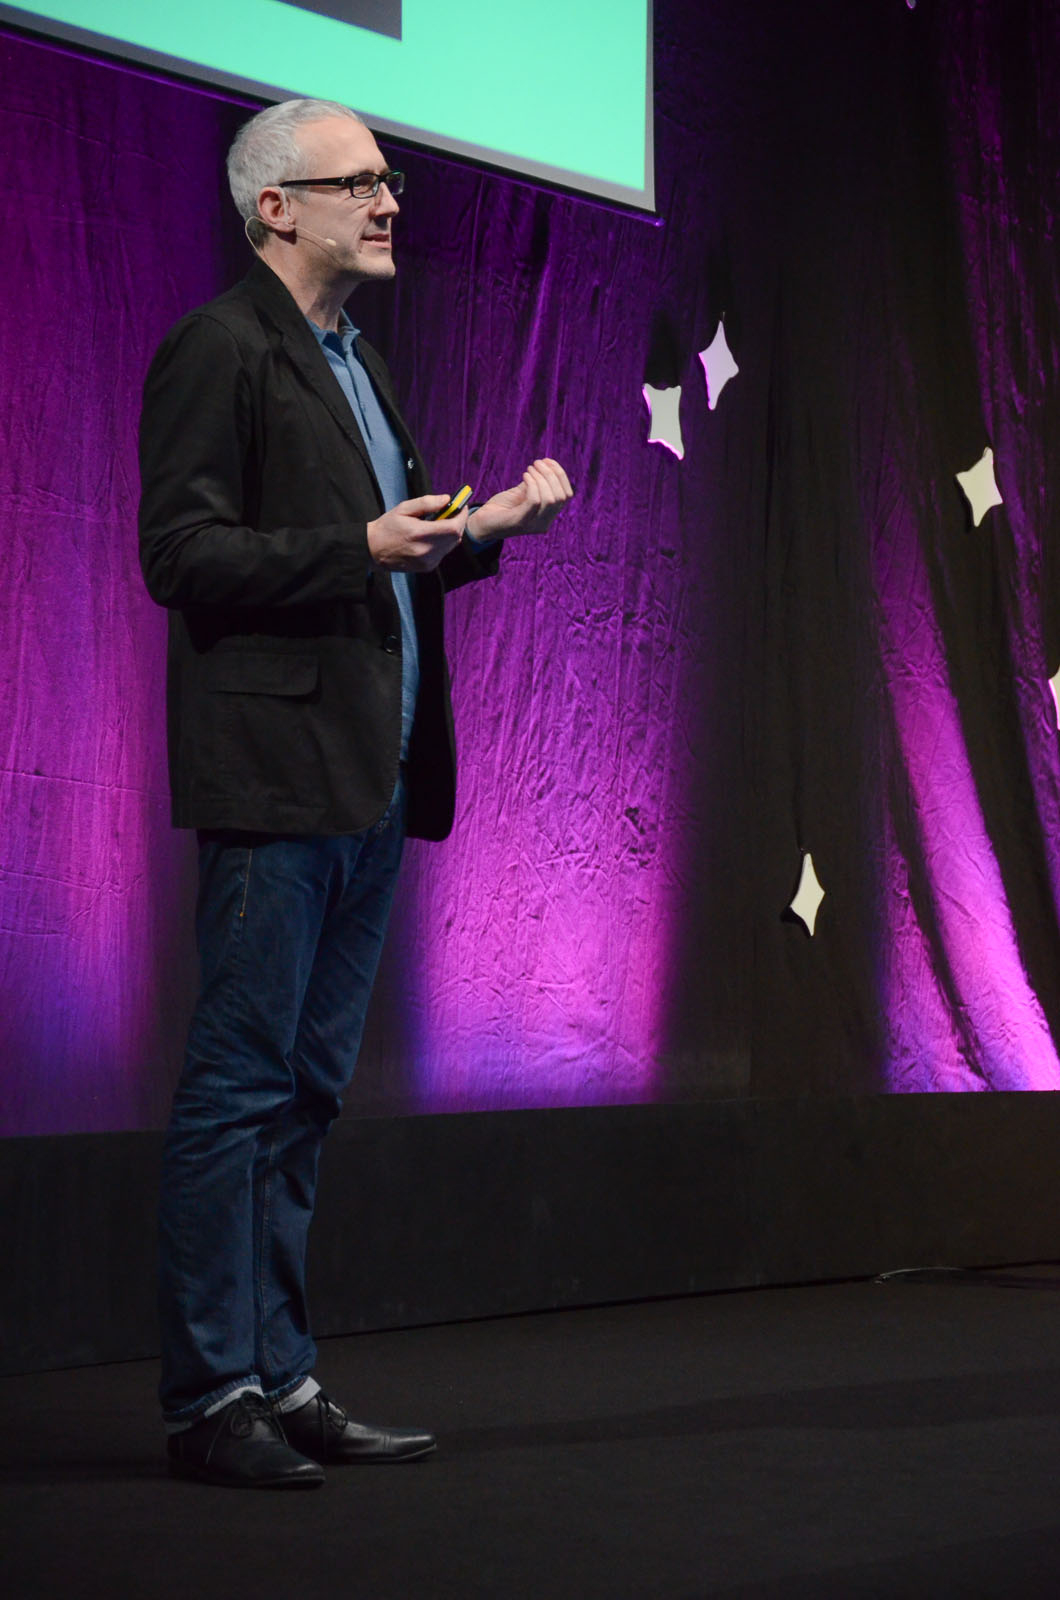 the man is standing in front of a large purple wall and gesturing to someone